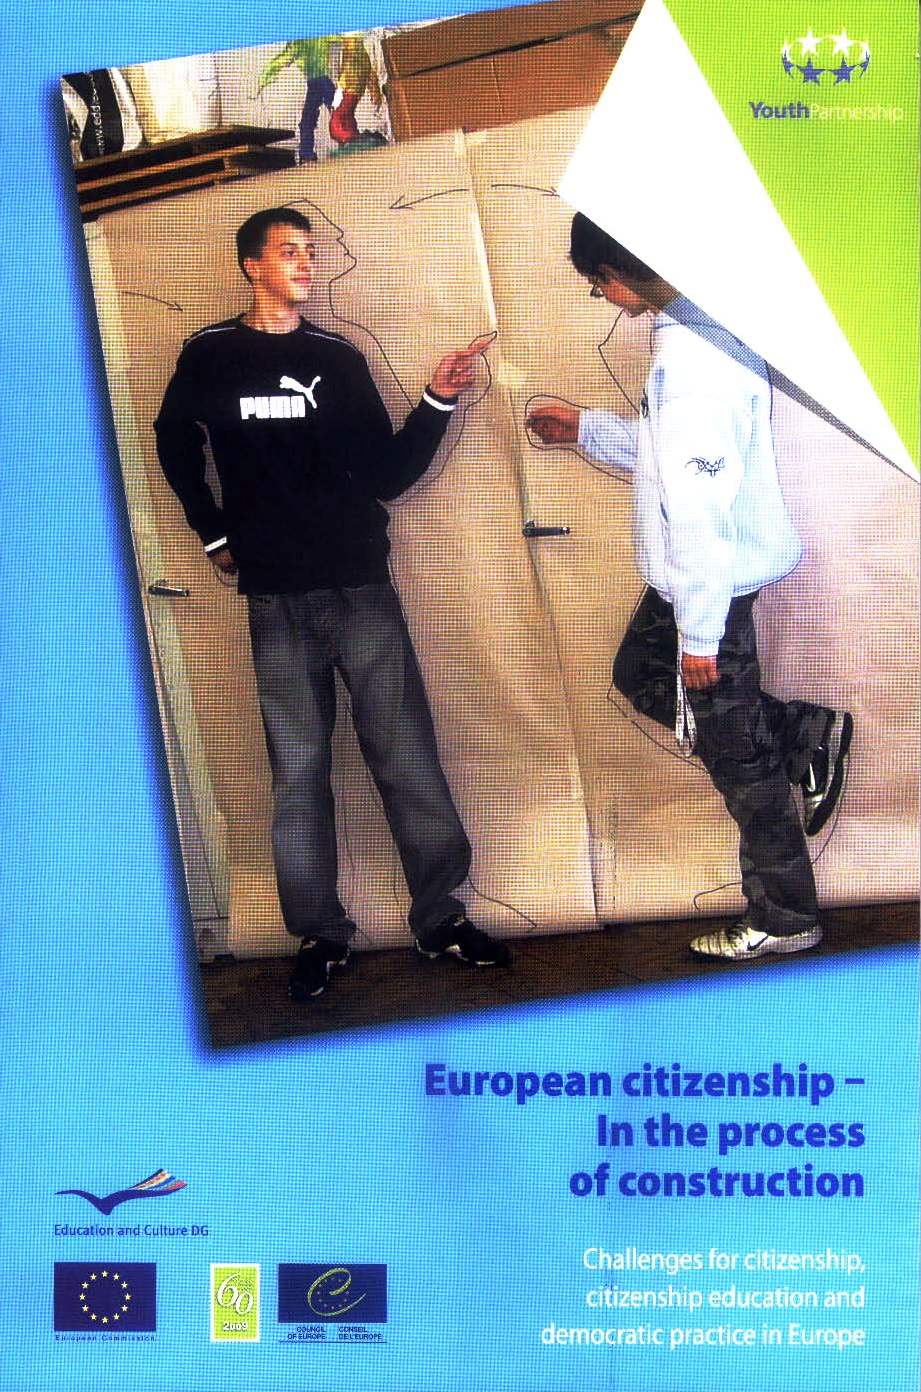 European citizenship - In the process of construction